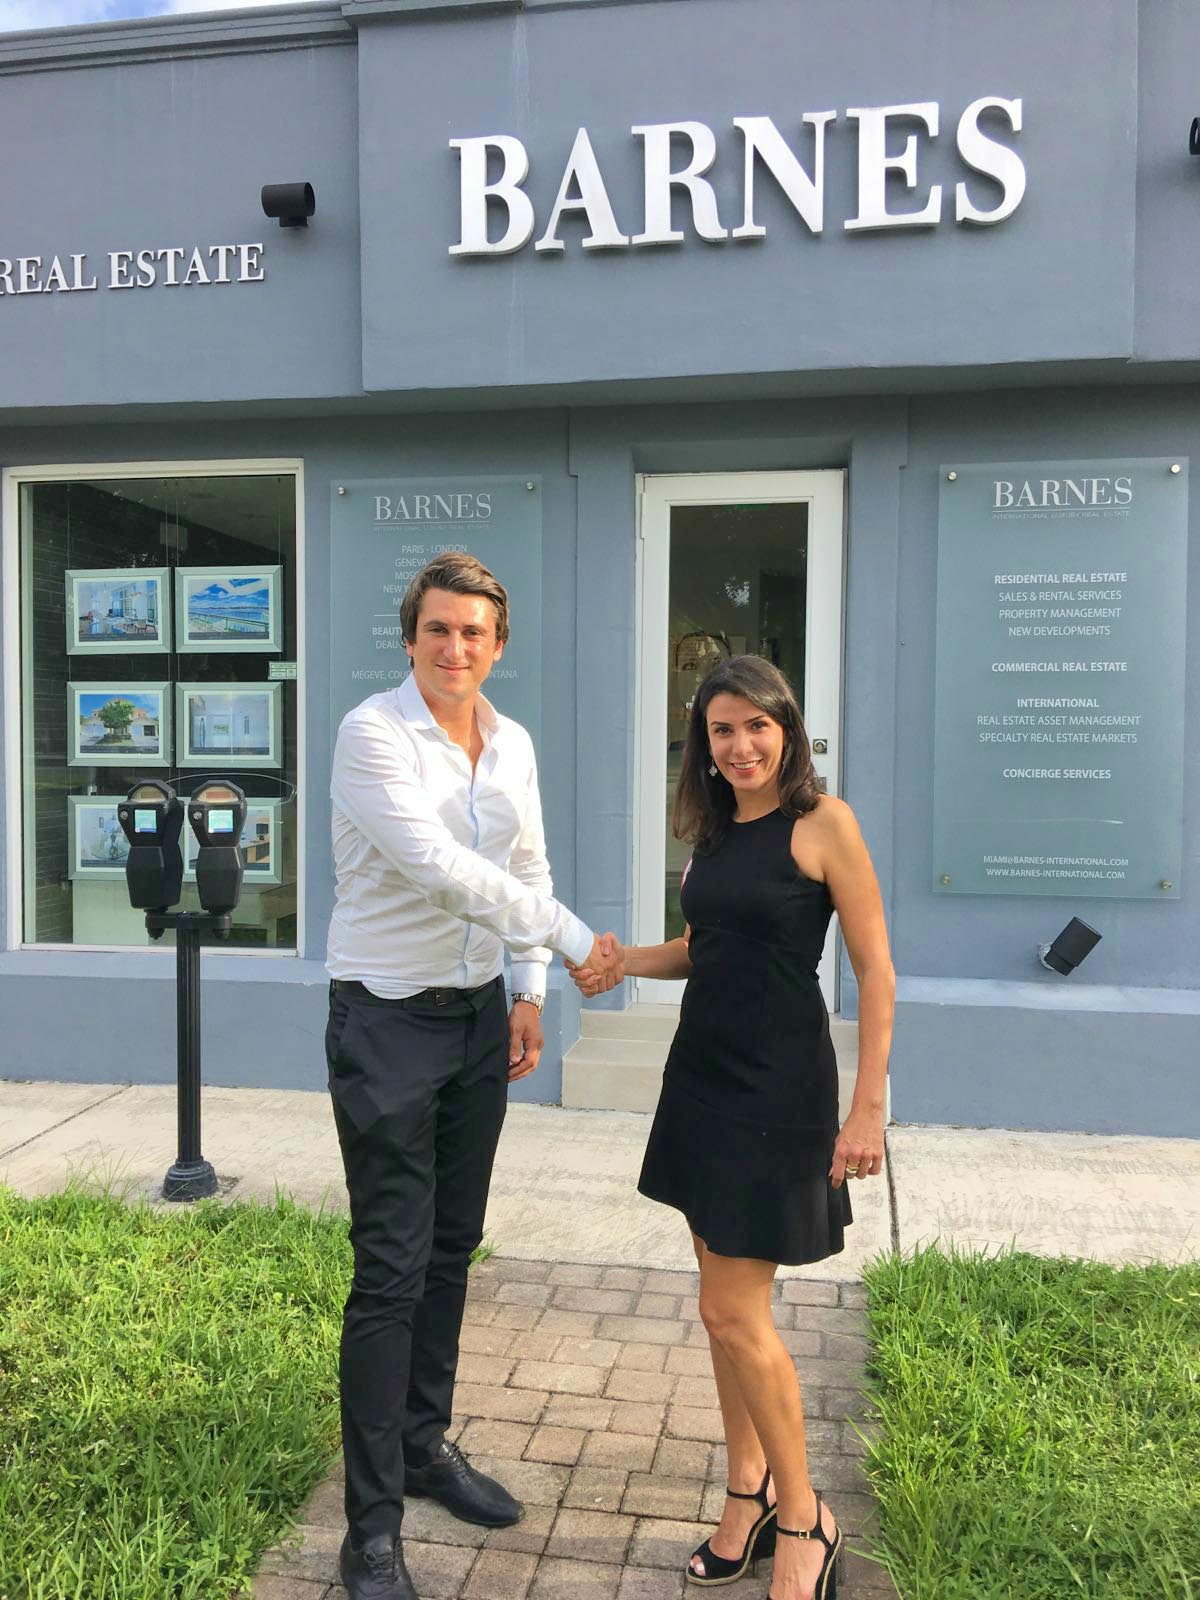 New horizons and strategies with the International Real Estate firm Barnes